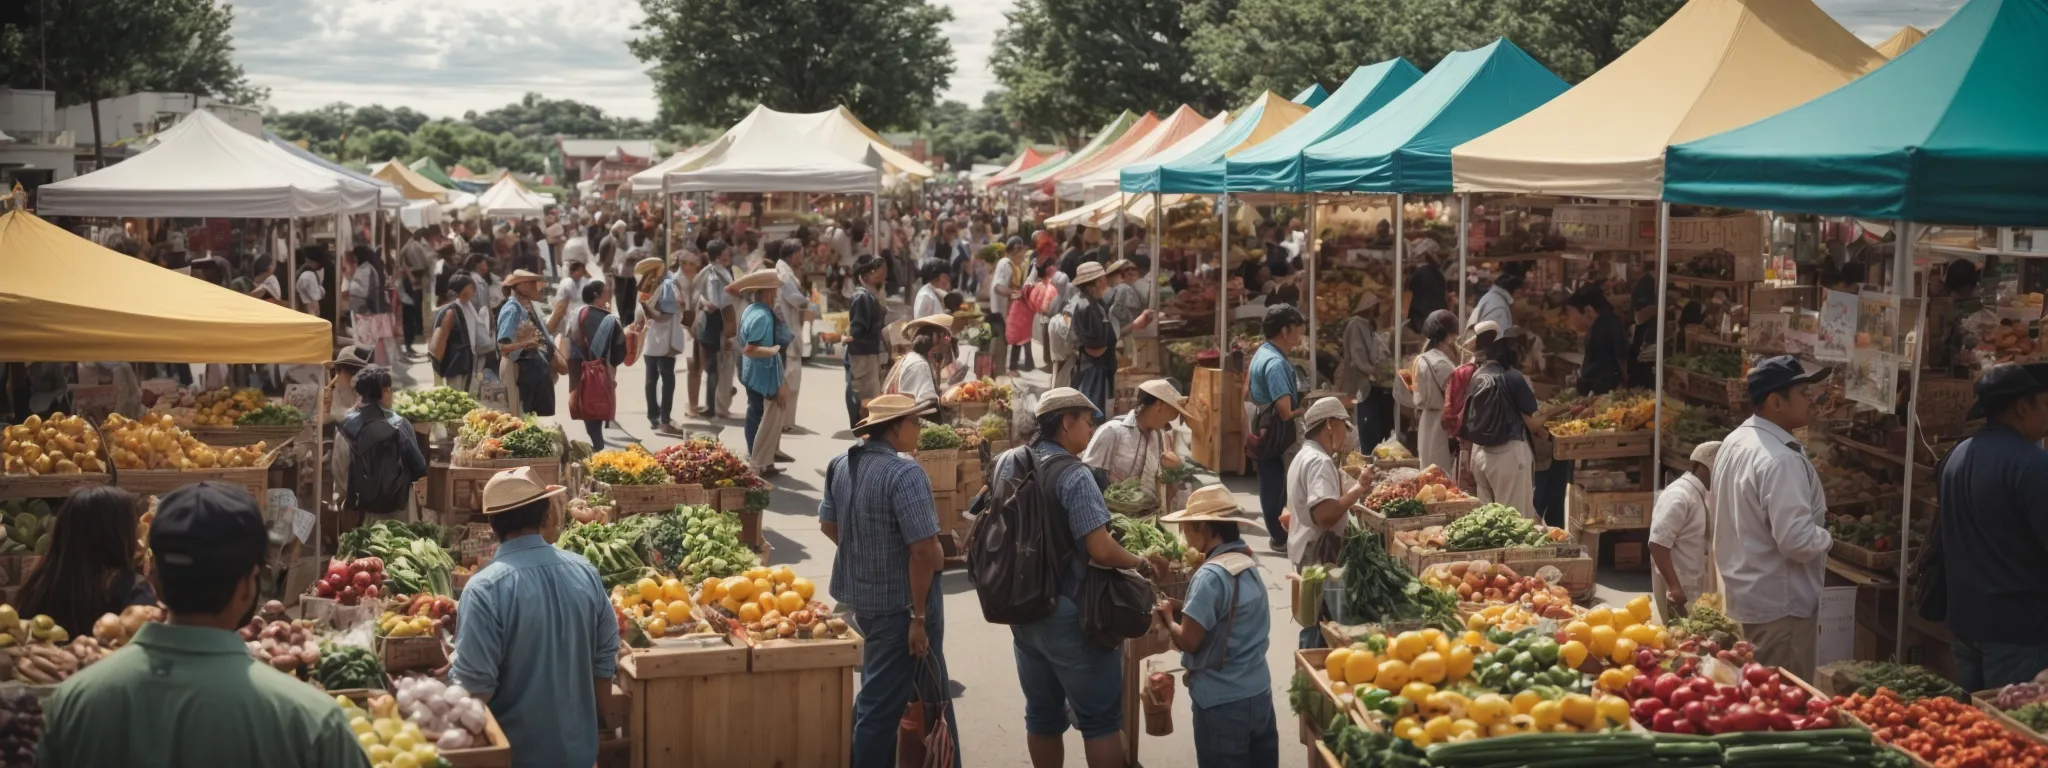 a bustling local farmers market with vibrant booths and a diverse crowd engaging with community vendors.